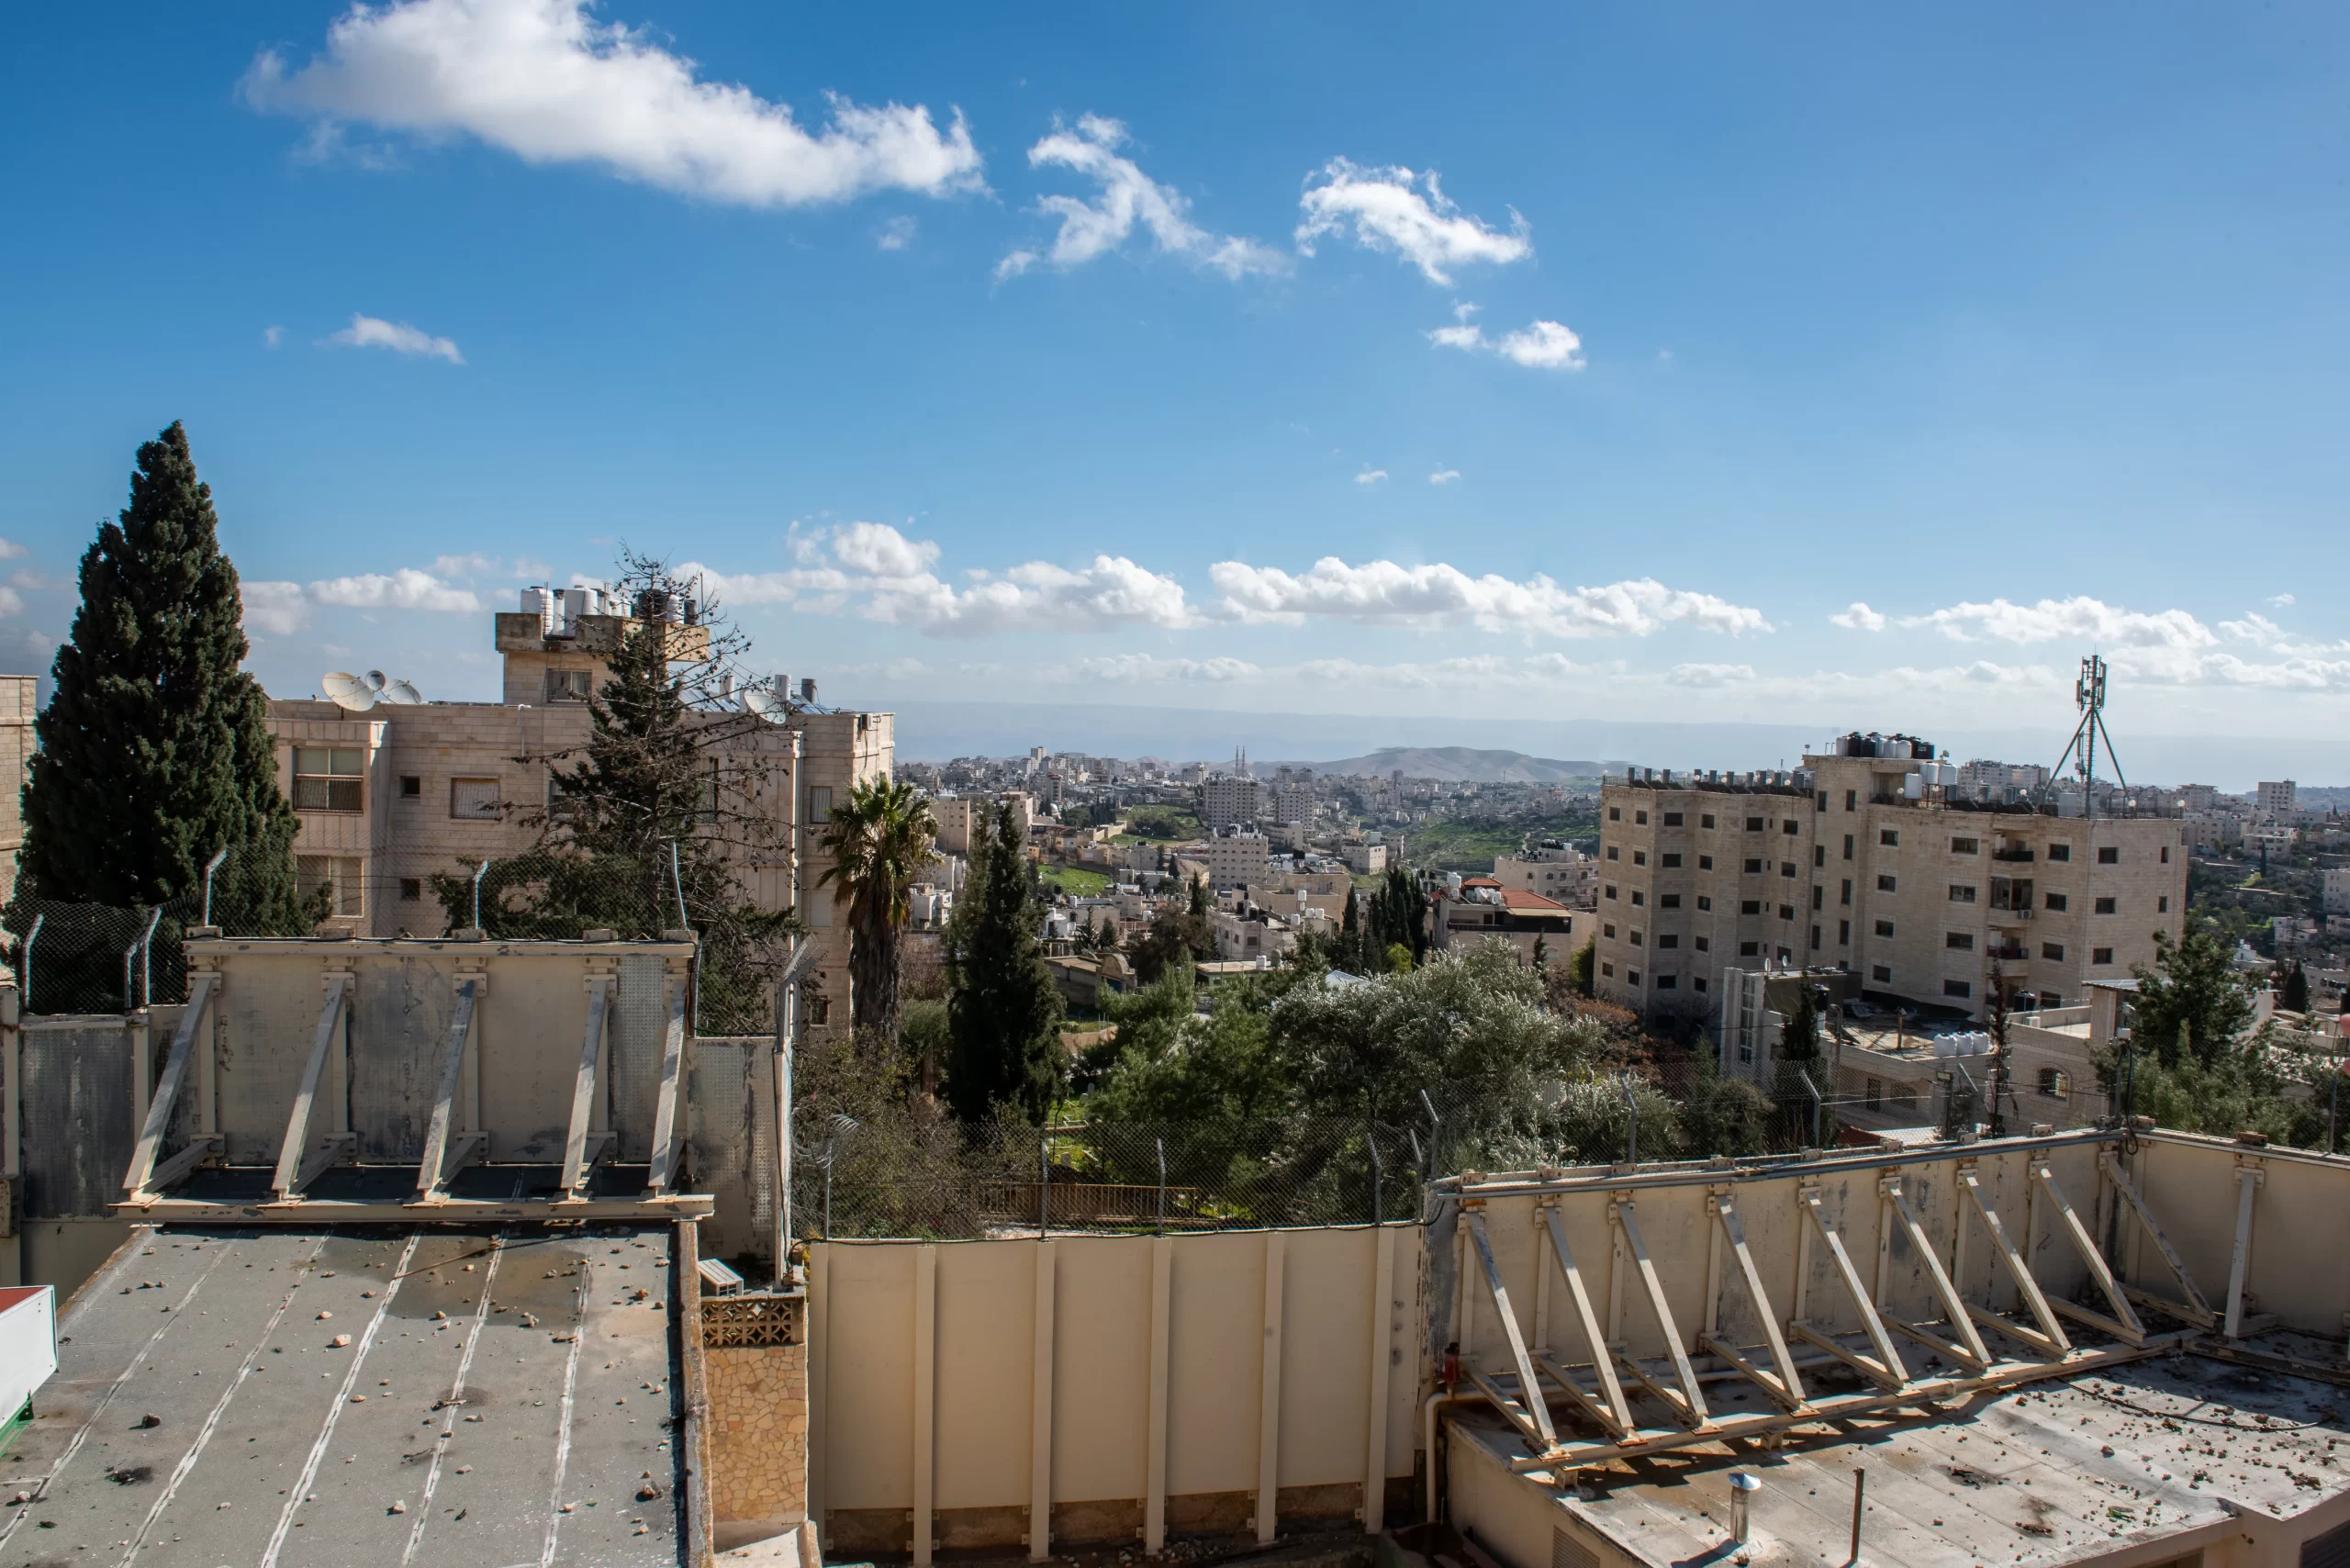 A view of the separation wall between Israel and the Palestinian Territories from the terrace of the Comboni Sisters' house in East Jerusalem. The wall, constructed by the Israelis in 2009, runs along the border of their property, dividing the village of Bethany/al-Eizariya in two, believed to be the site of the miracle of the raising of Lazarus. The sisters’ residence remains on the Israeli side, while the church and the tomb of Lazarus are on the other side of the wall. Credit: Marinella Bandini